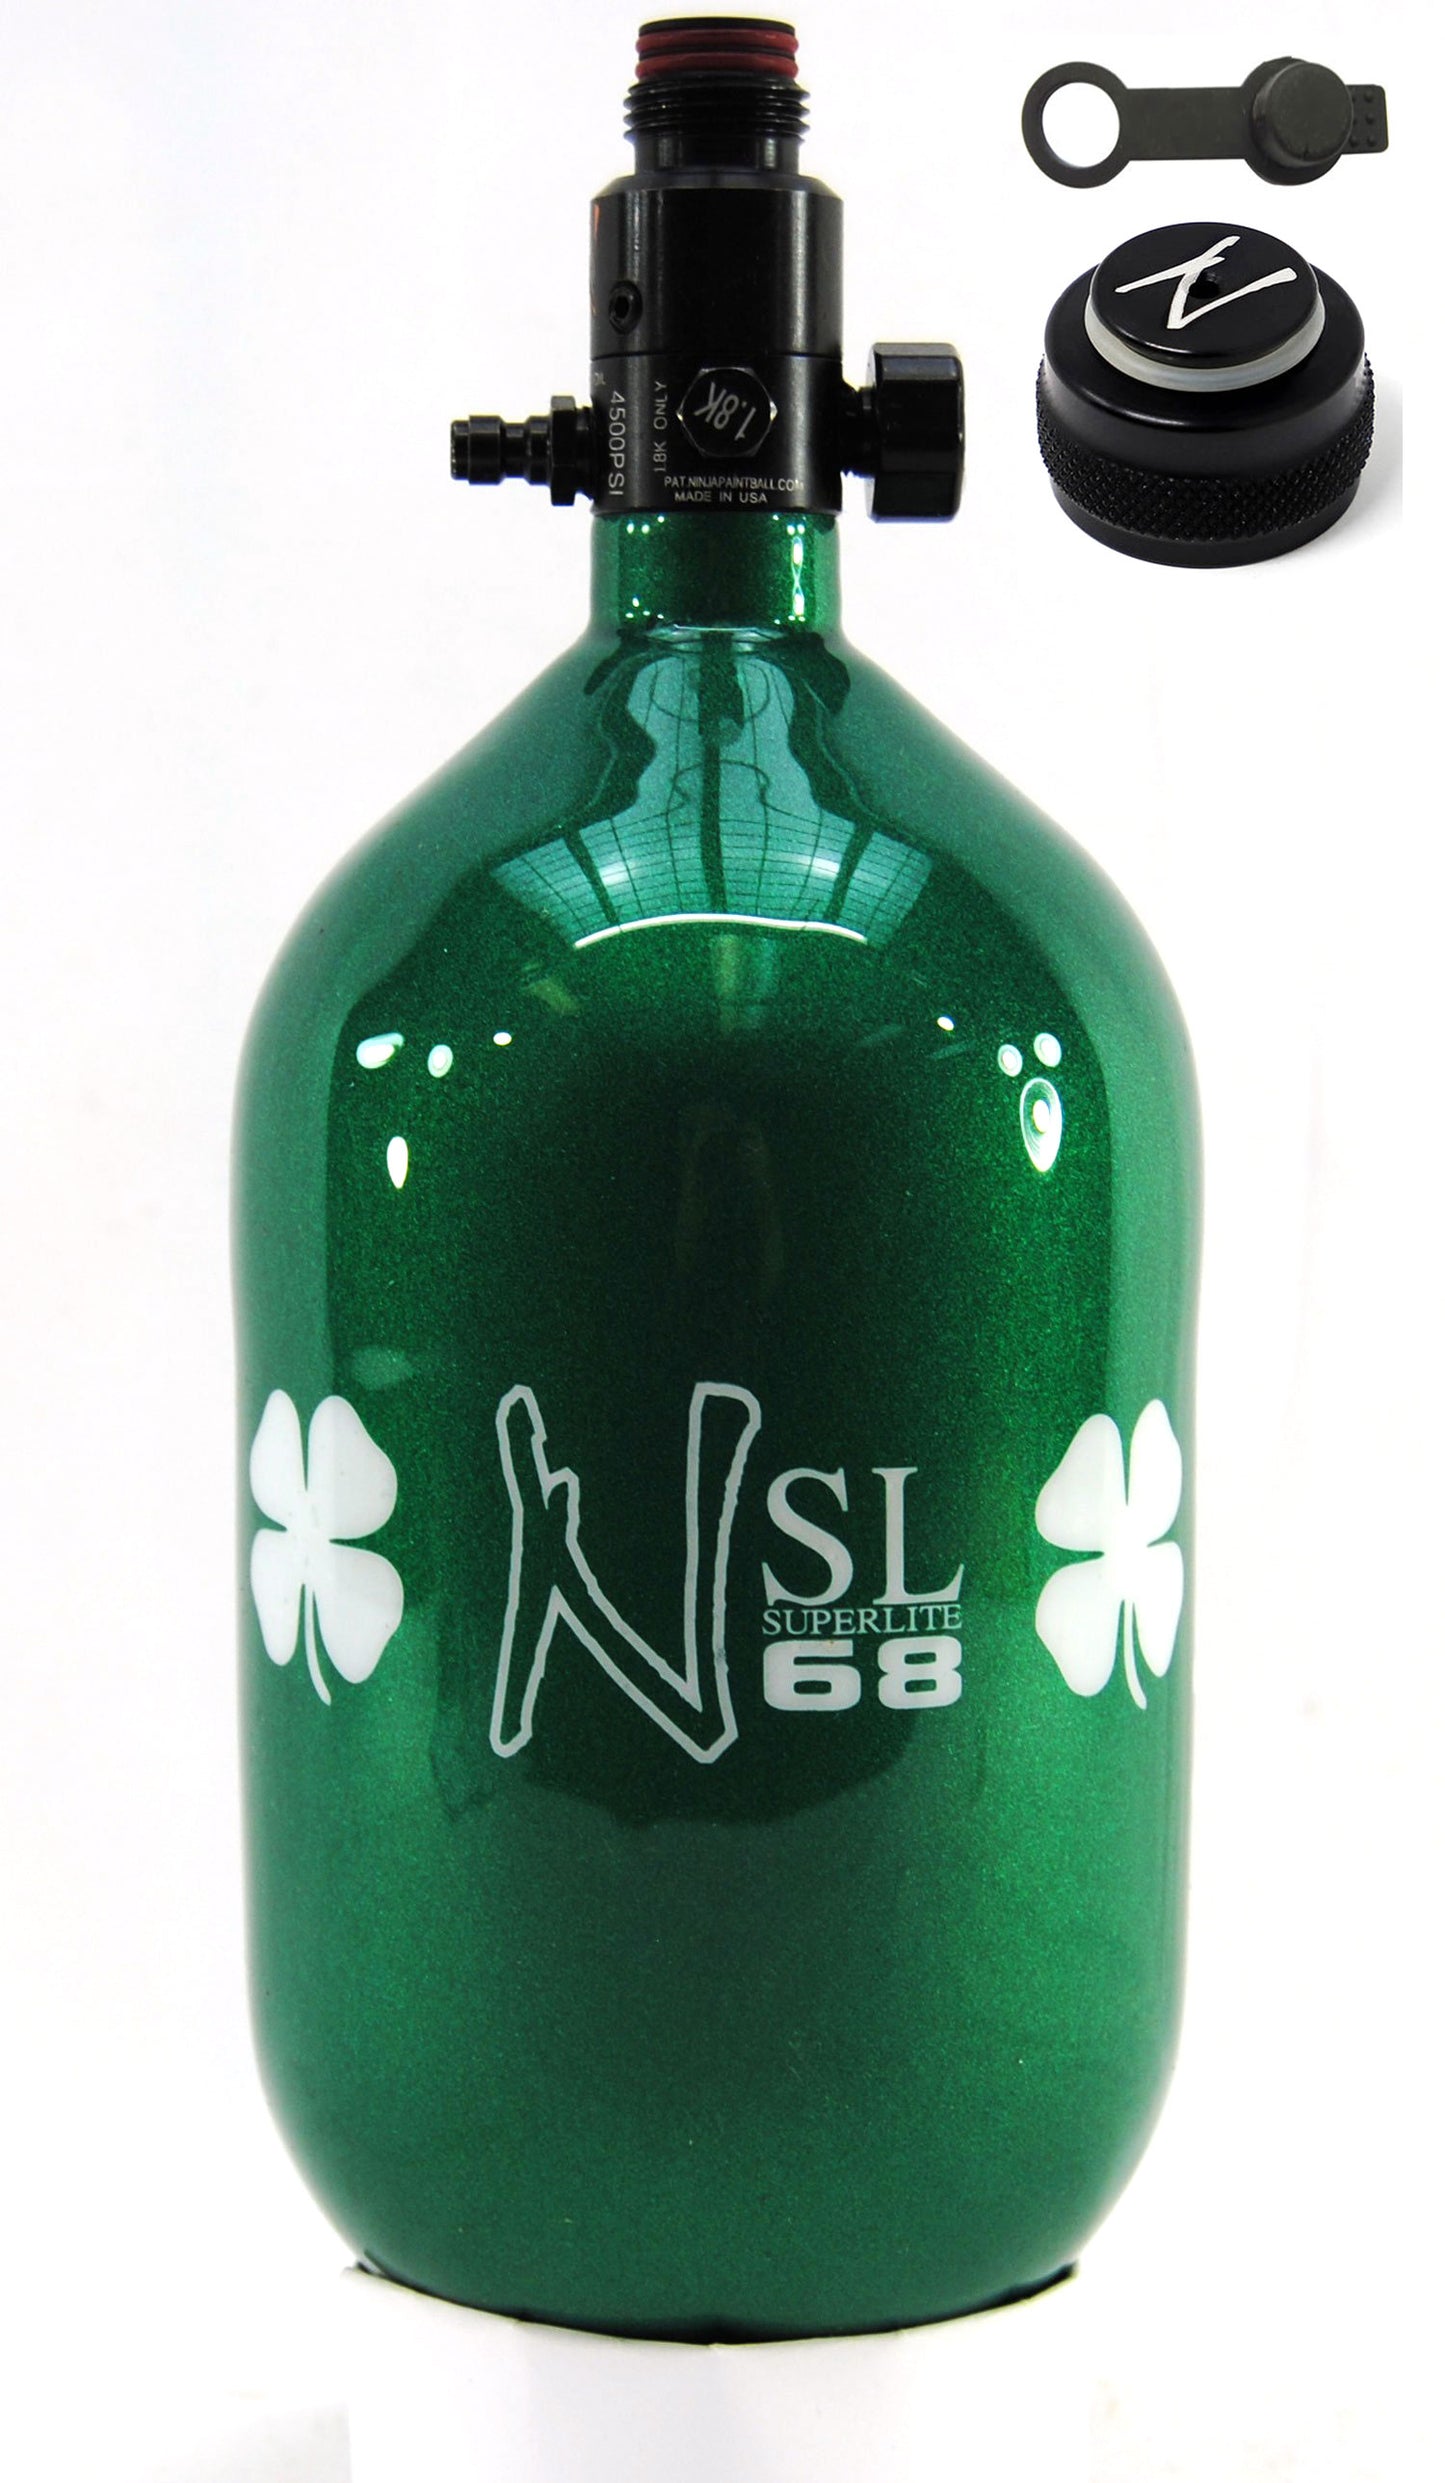 Ninja 68ci 4500psi SL2 HPA Tank with Thread Protector/Nipple Cover - Limited Edition St. Patrick's Day Lucky Clover - Ninja Paintball